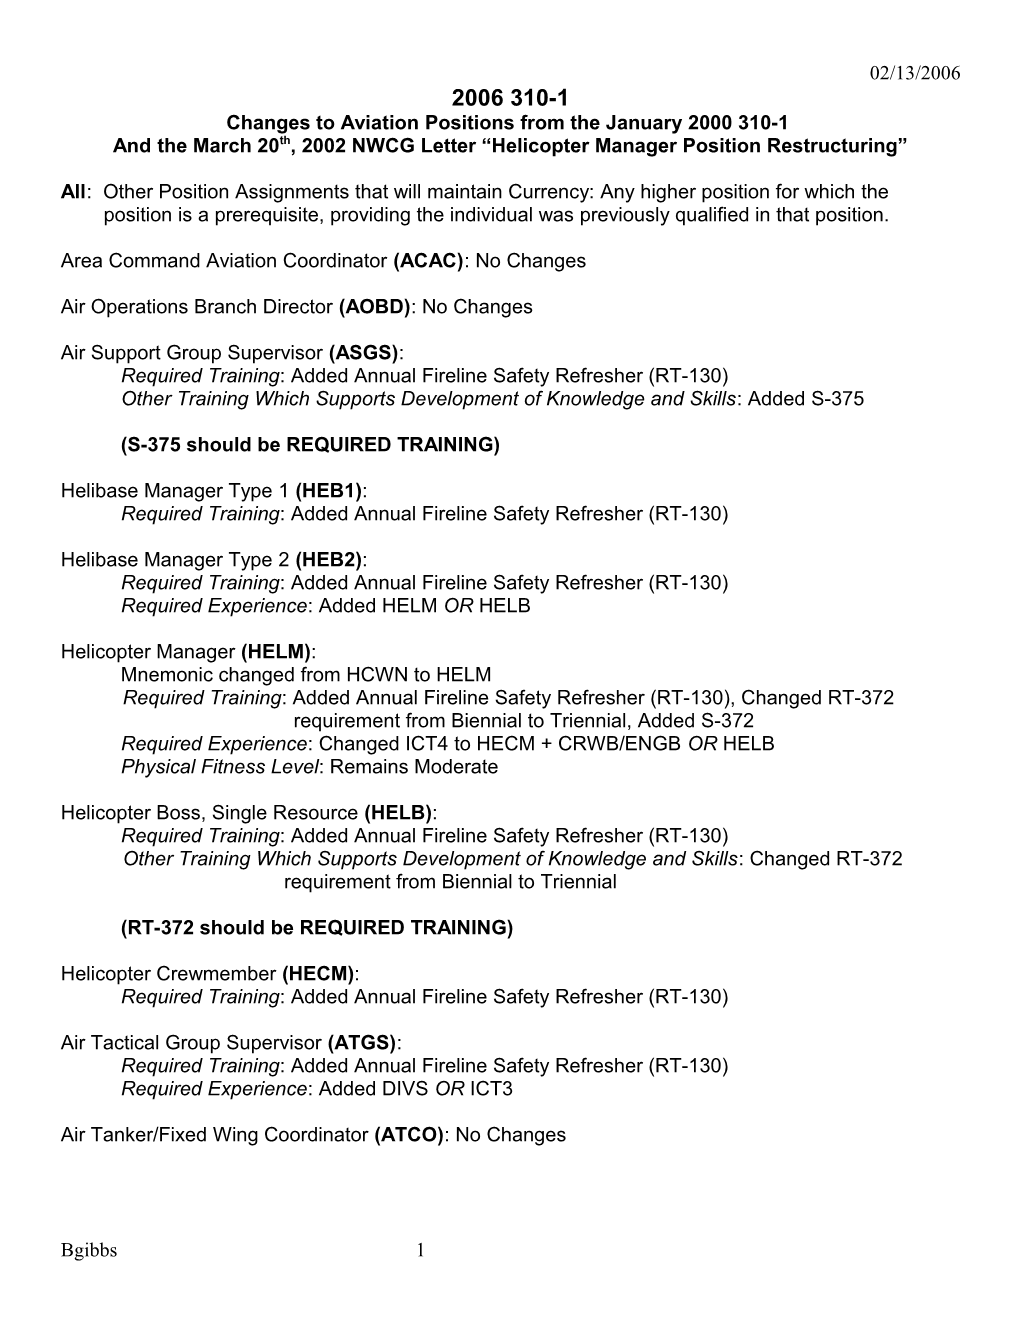 Changes to Aviation Positions from the January 2000 310-1